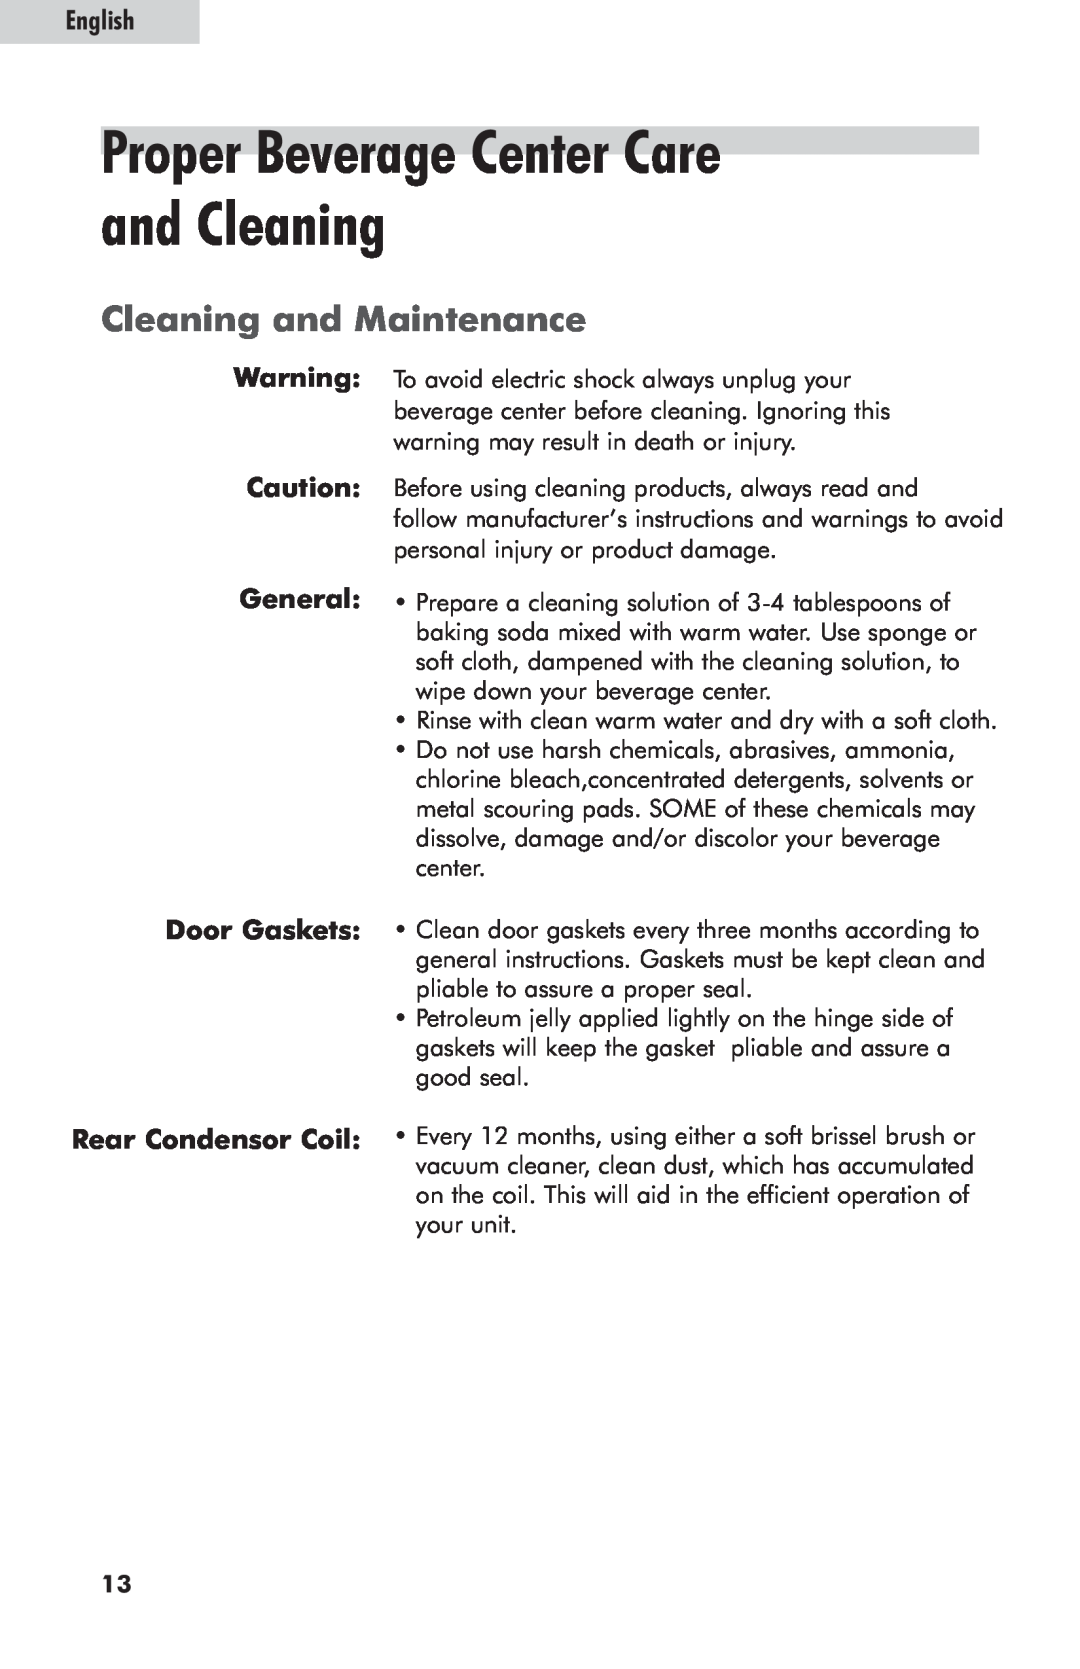 Haier hc125fvs user manual Proper Beverage Center Care and Cleaning, Cleaning and Maintenance, English 